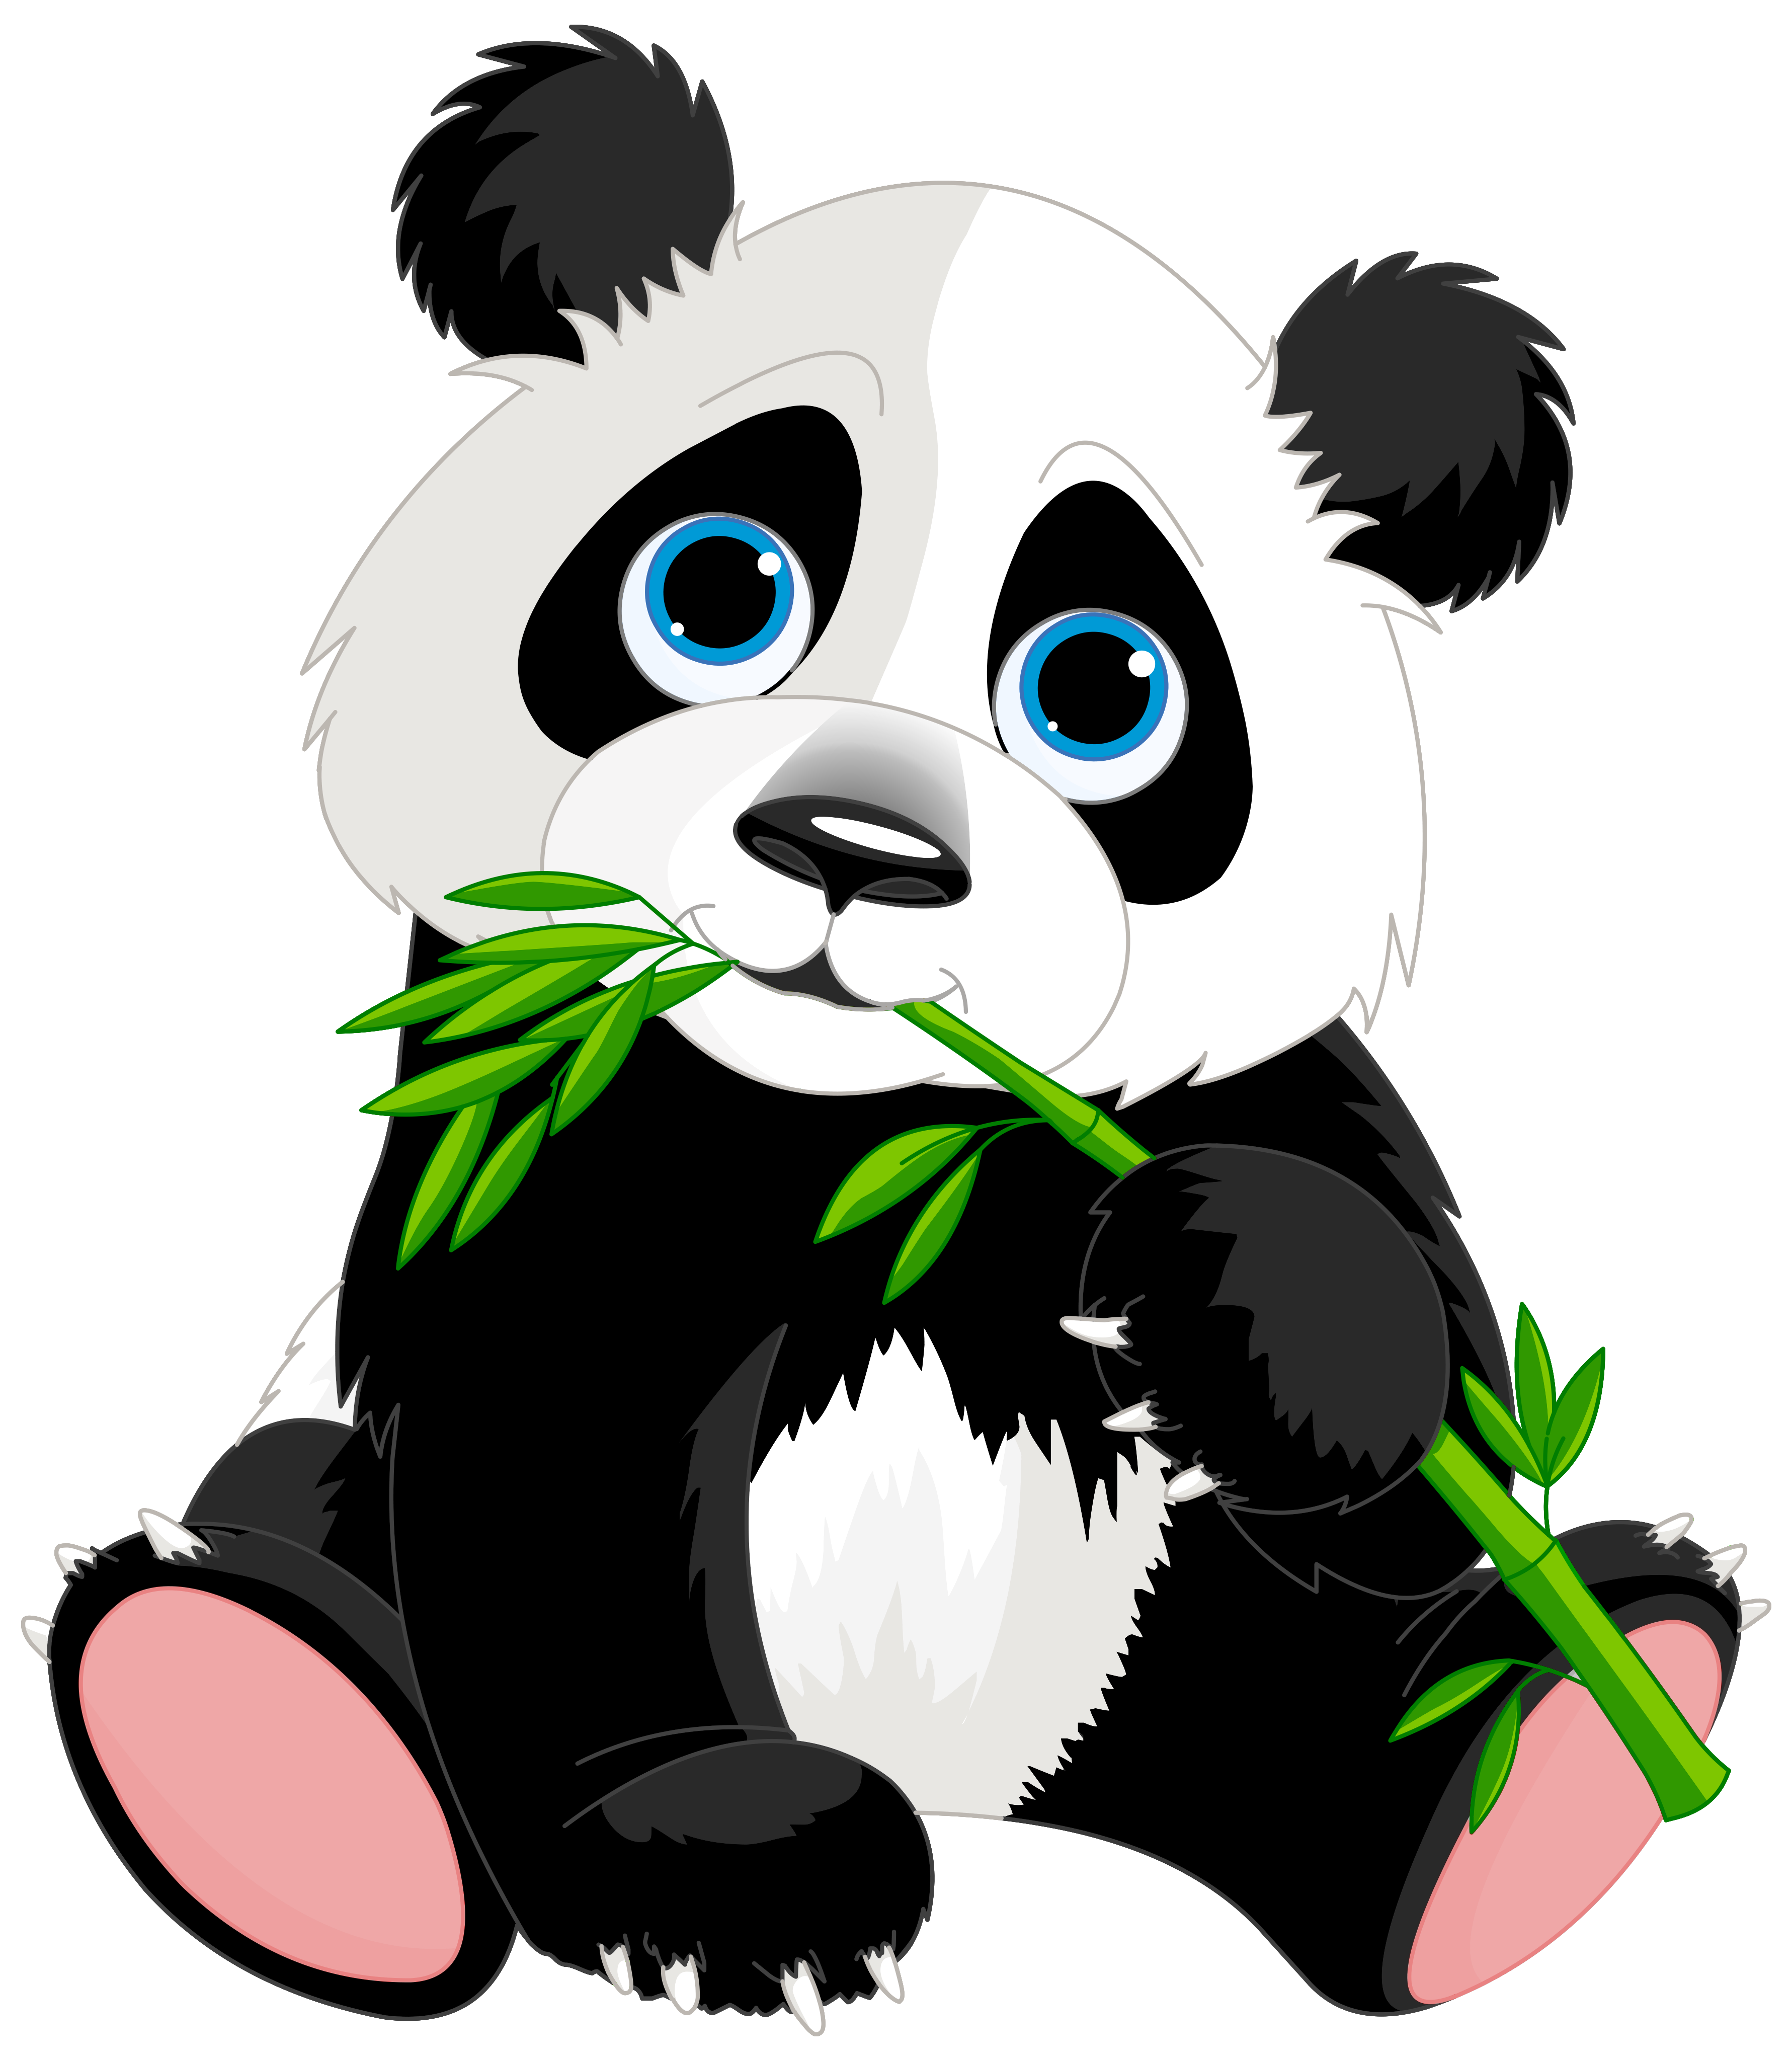 Cute Panda Cartoon PNG Clipart Image​ | Gallery Yopriceville - High-Quality Free  Images and Transparent PNG Clipart